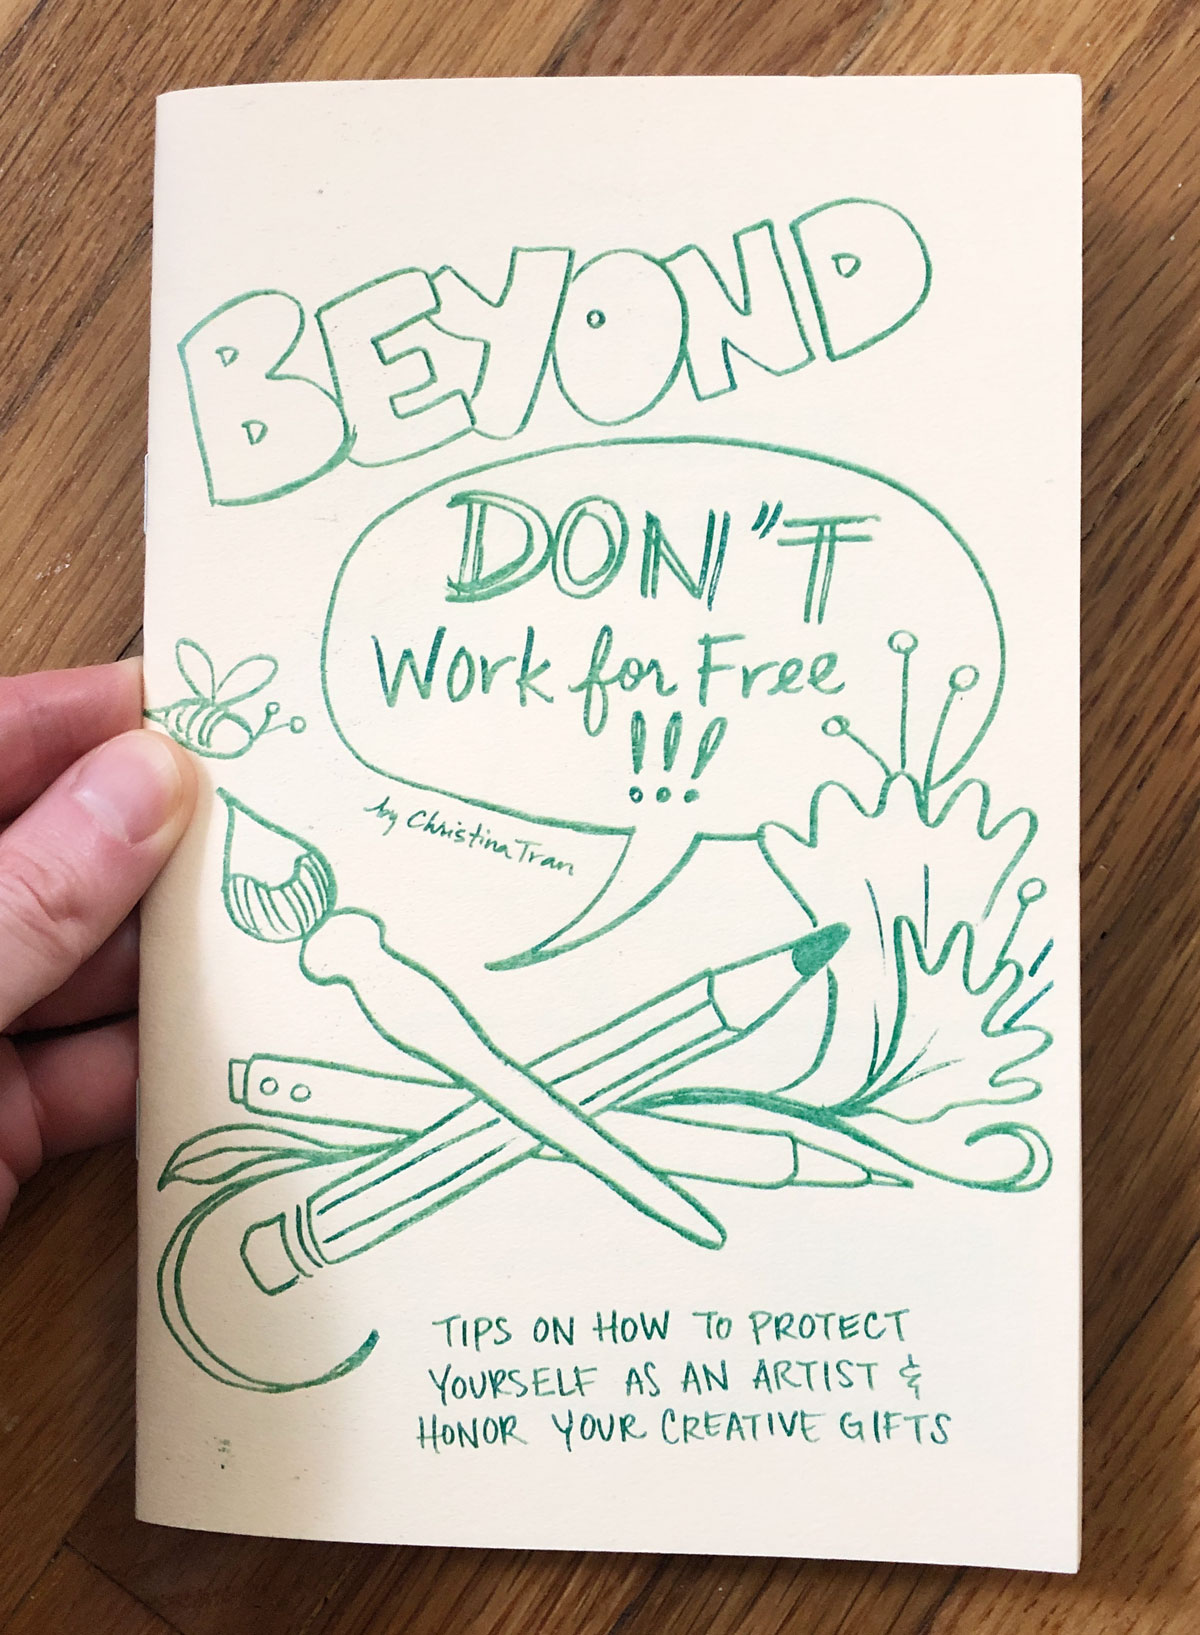 Beyond “Don’t Work For Free!!!”